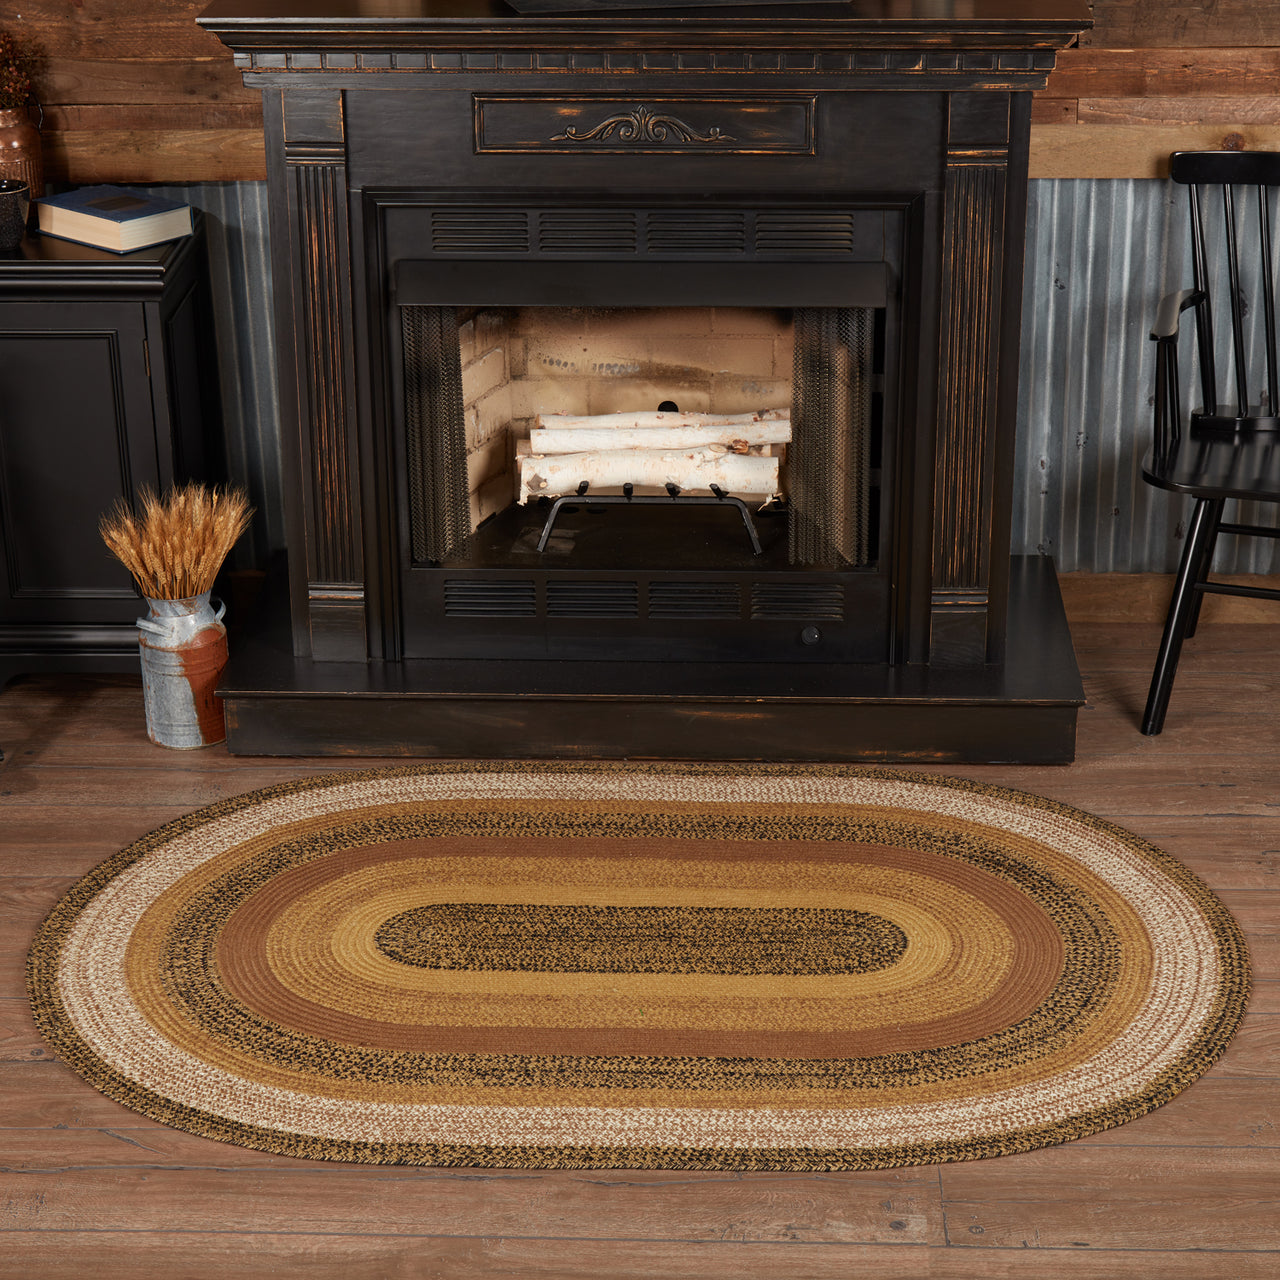 Kettle Grove Jute Braided Rug Oval 4'x6' with Rug Pad VHC Brands